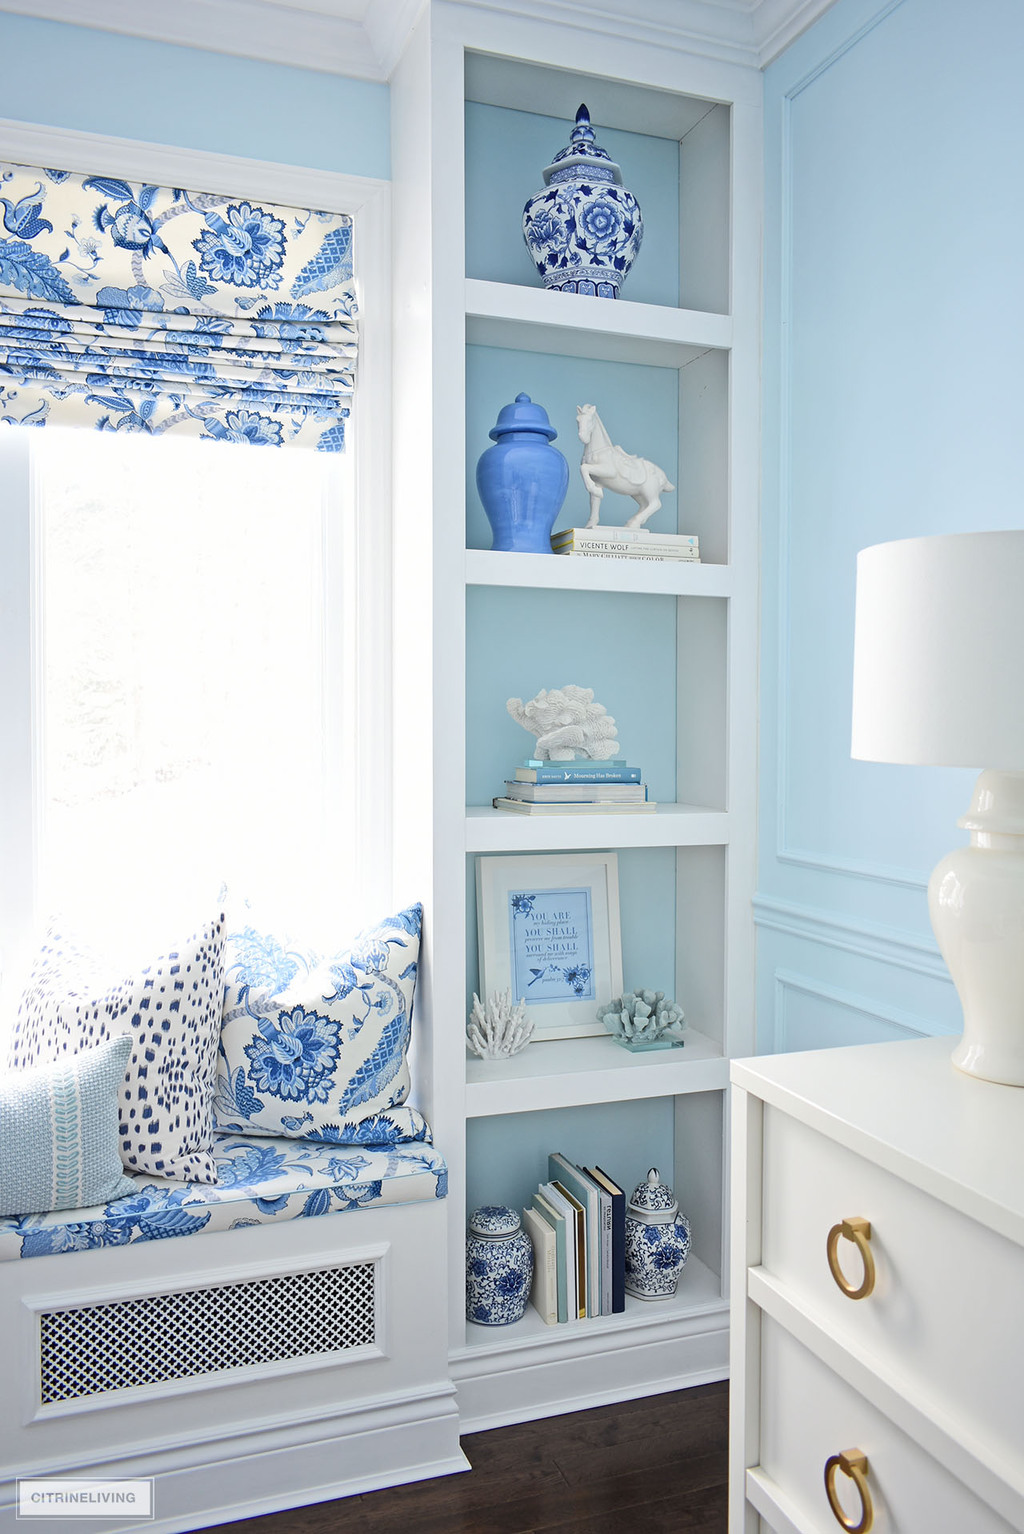 Gorgeous home office builtin shelves styled with beautiful blue and white decor and ginger jars.